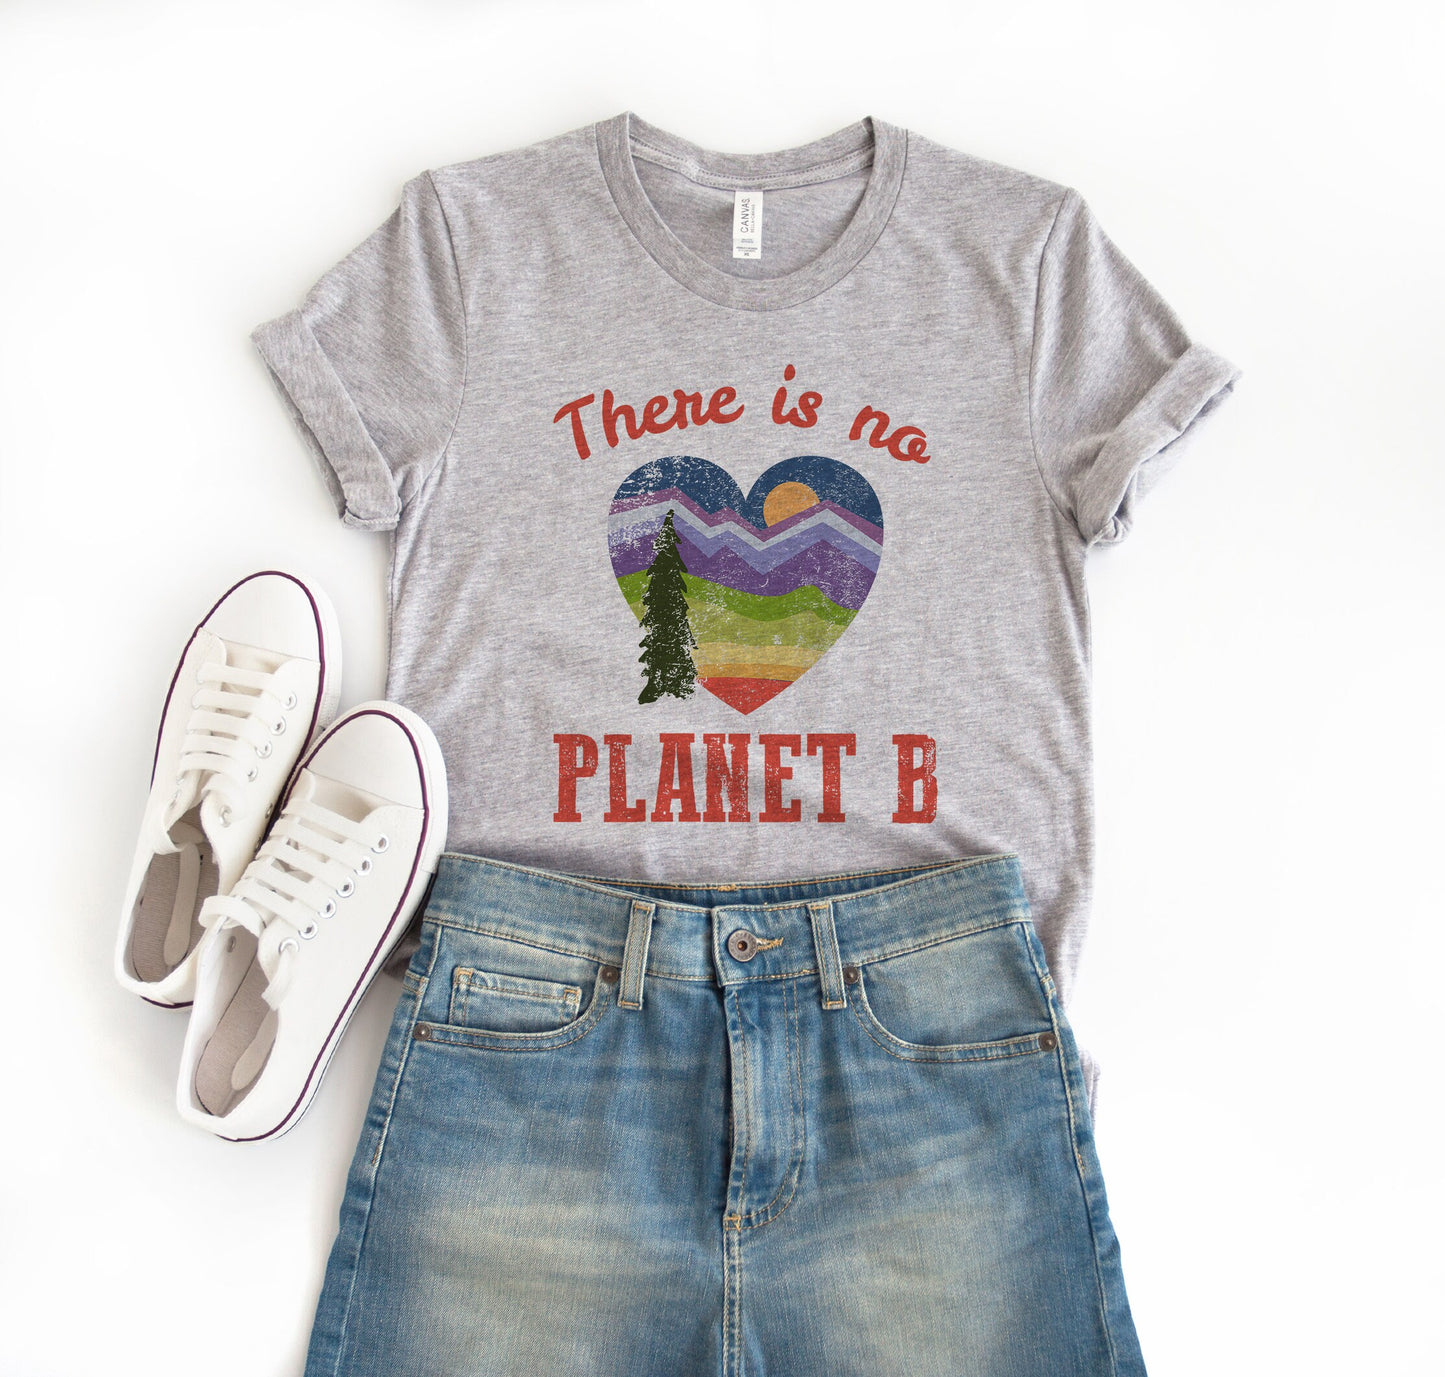 There is No Planet B Earth Day Retro Boho Hippie Style Ultra Soft Graphic Tee Unisex Soft Tee T-shirt for Women or Men